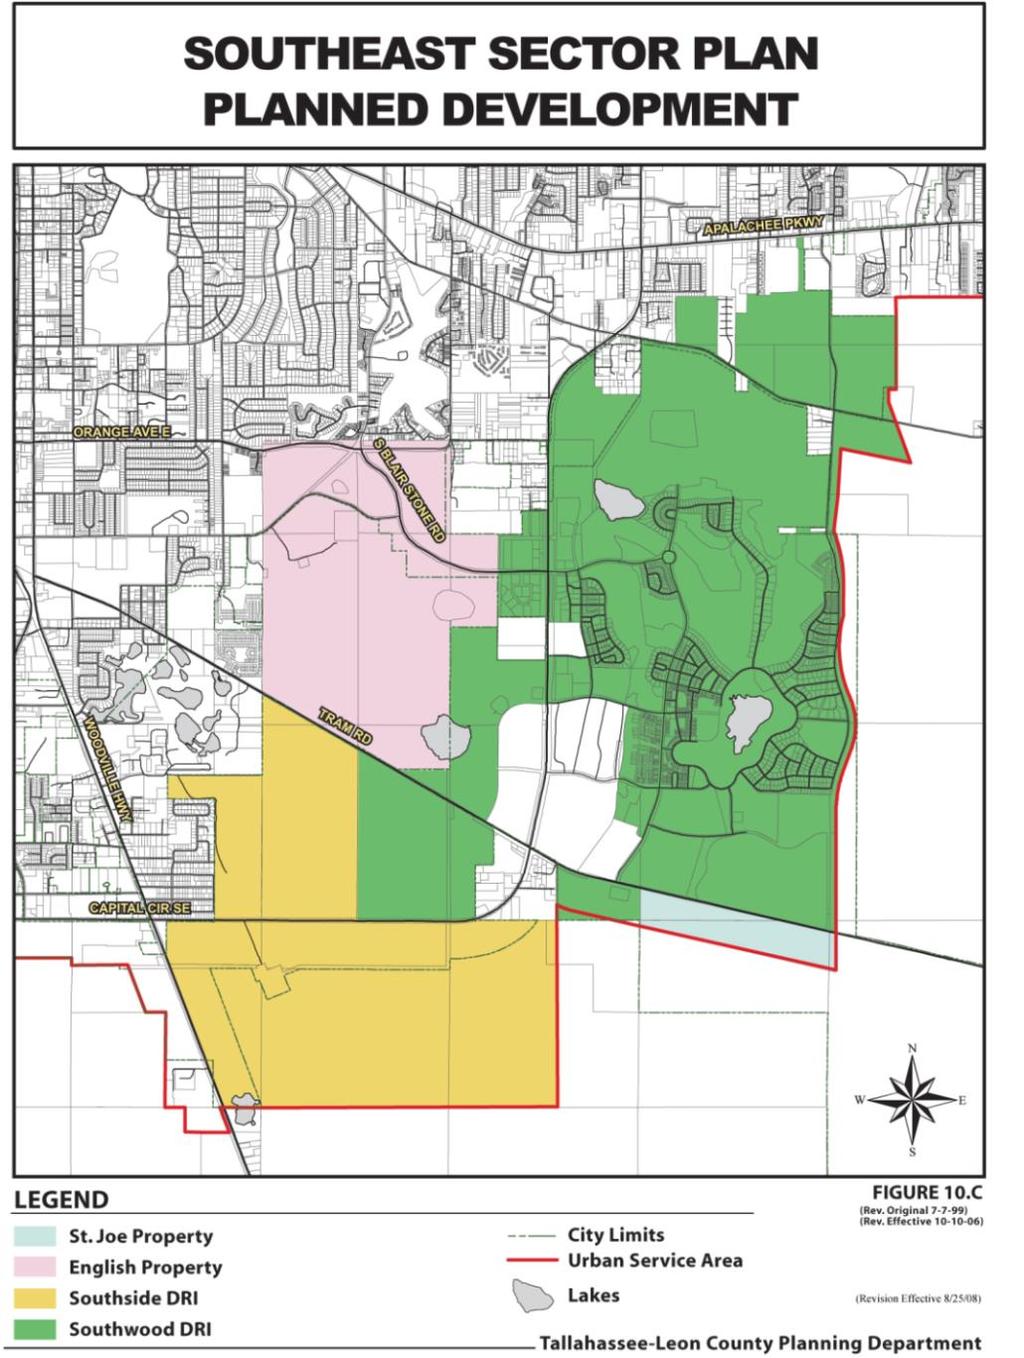 Planned Development Tallahassee-Leon County 2030